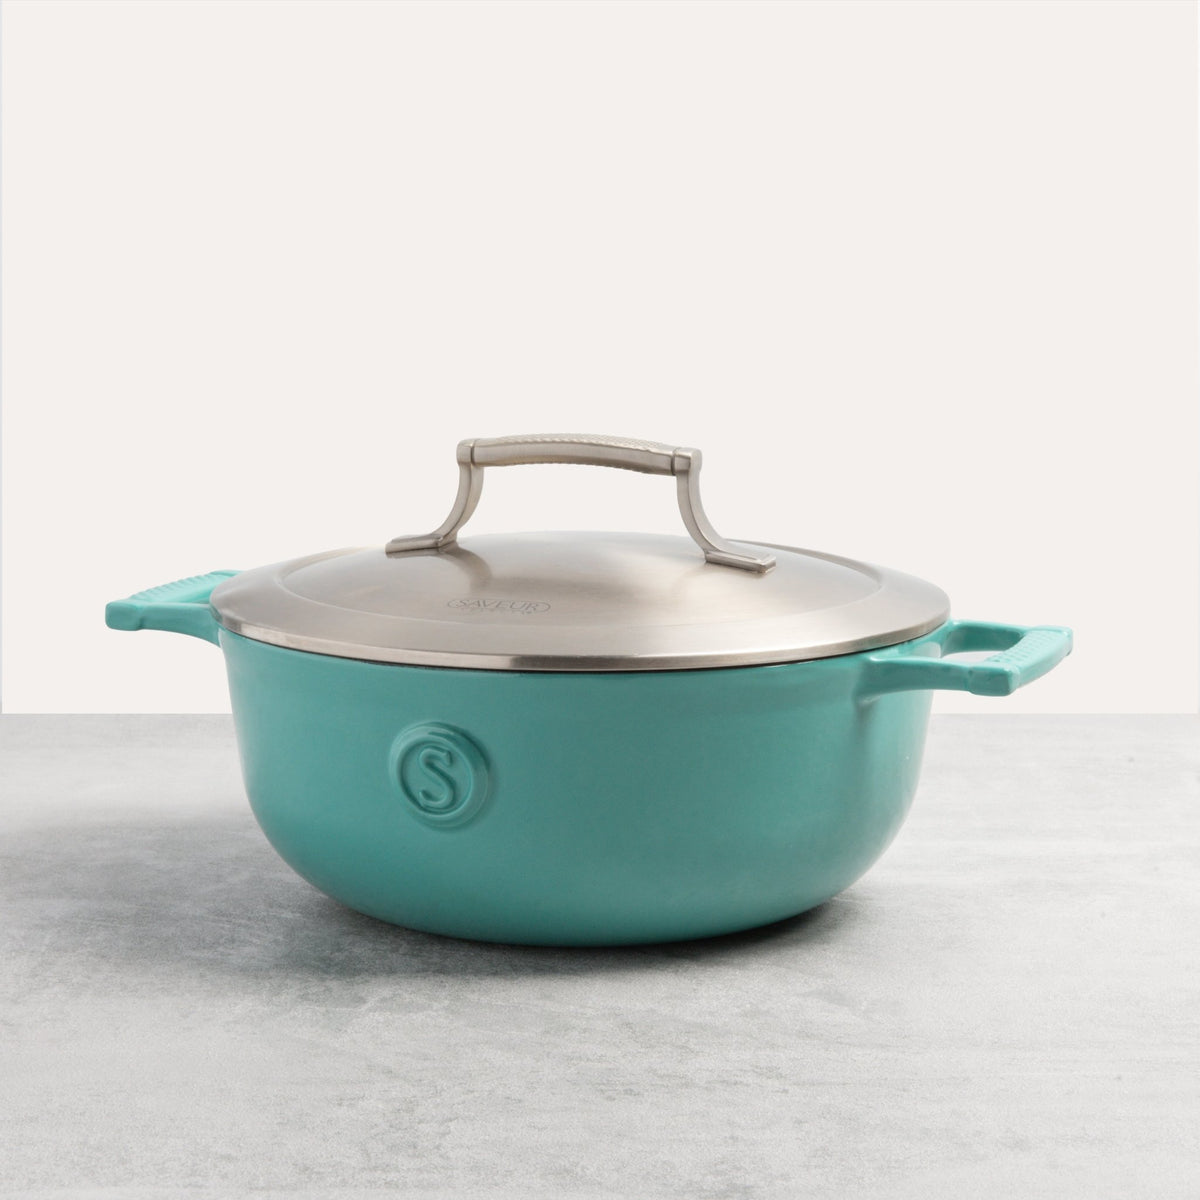 SAVEUR Selects Enamelled Cast Iron Dutch Oven 3.3L | Buy Me Once UK